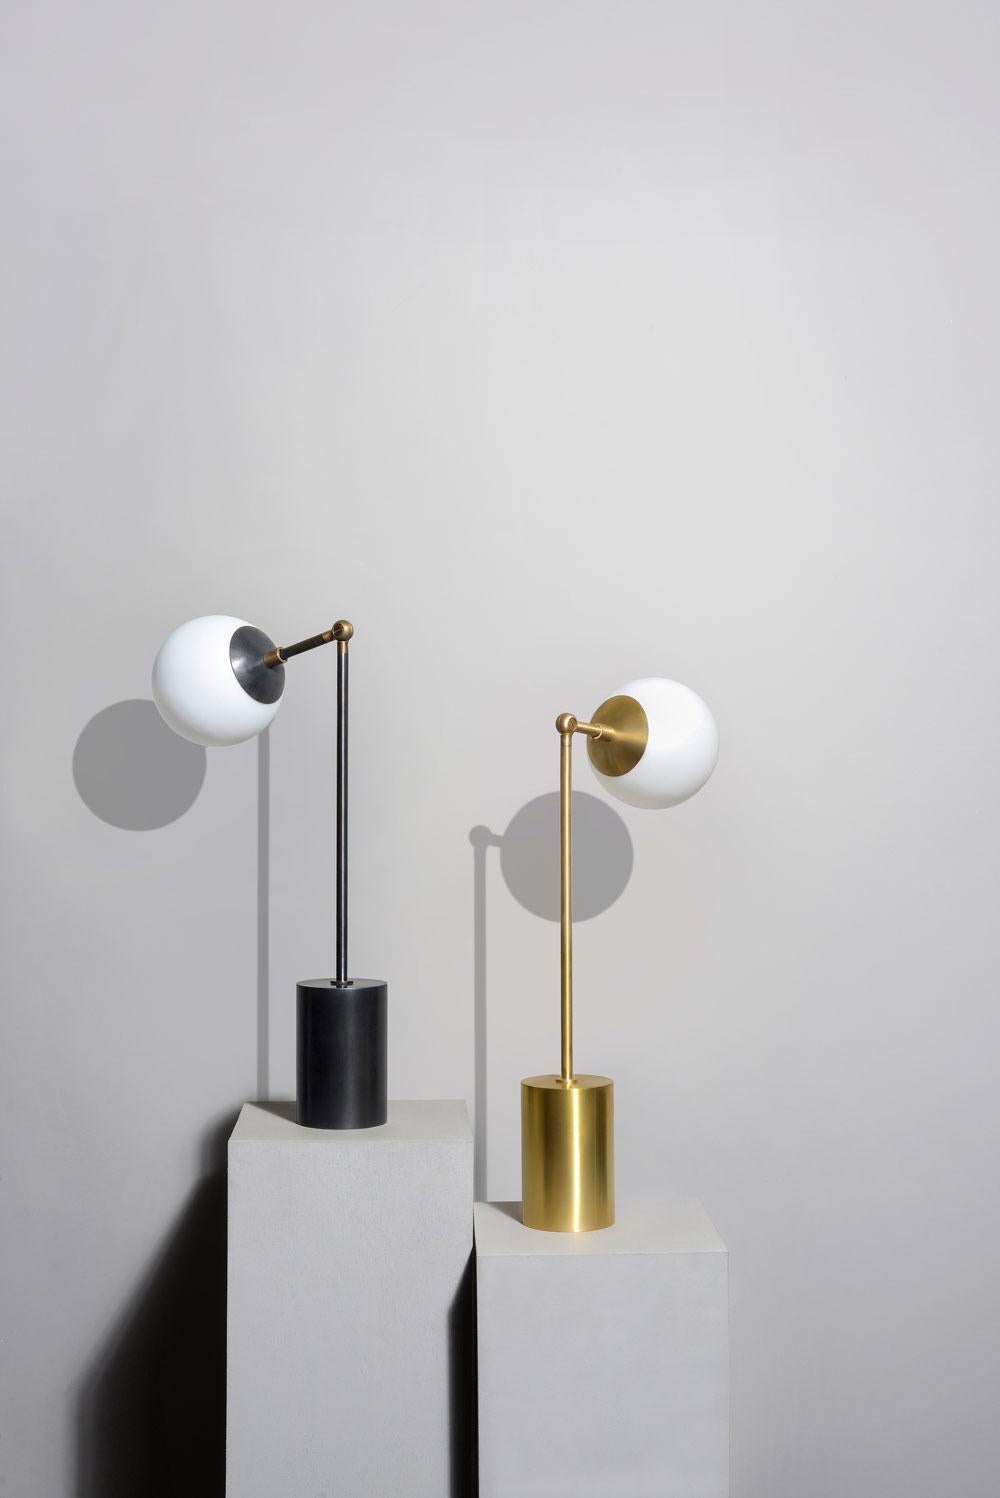 Tango is born from playful experimentation with vintage lighting components to create lighting fixtures that fuse sculptural form with hand-worn materials. Articulating elbows and brass shades create a sophisticated armature that emits soft pools of